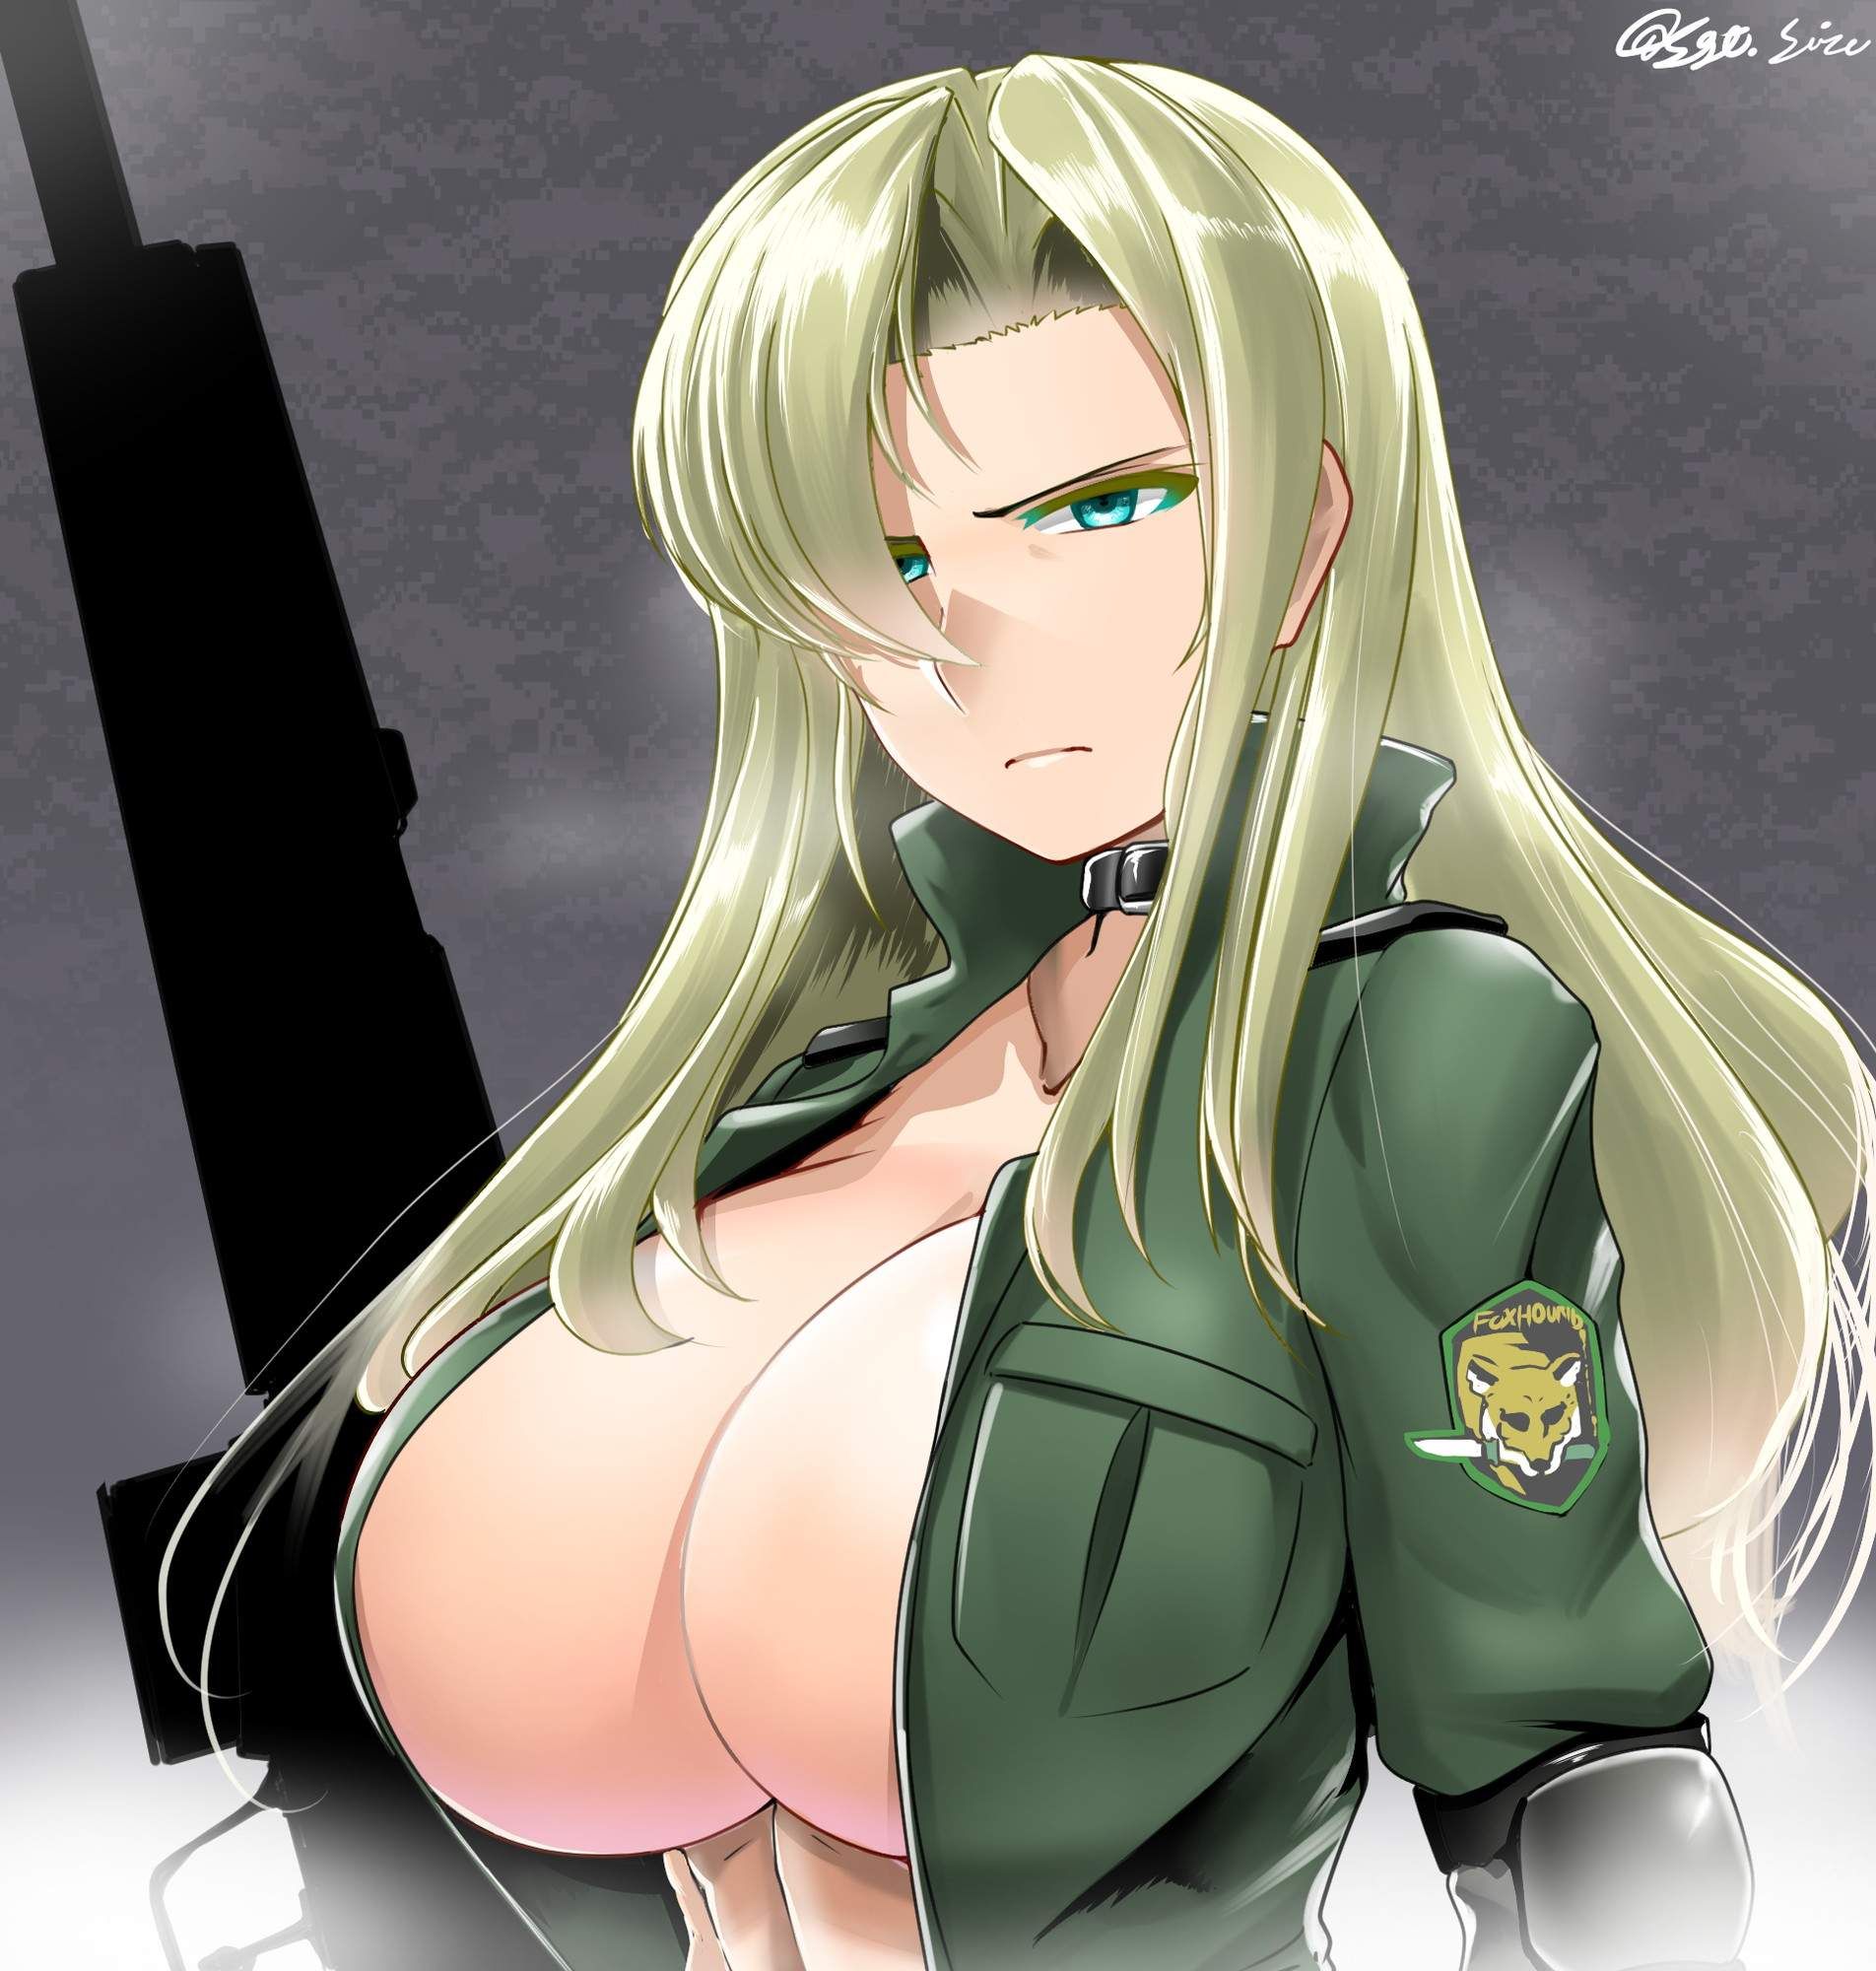 It has collected the image because the military uniform and combat clothes are erotic. 1